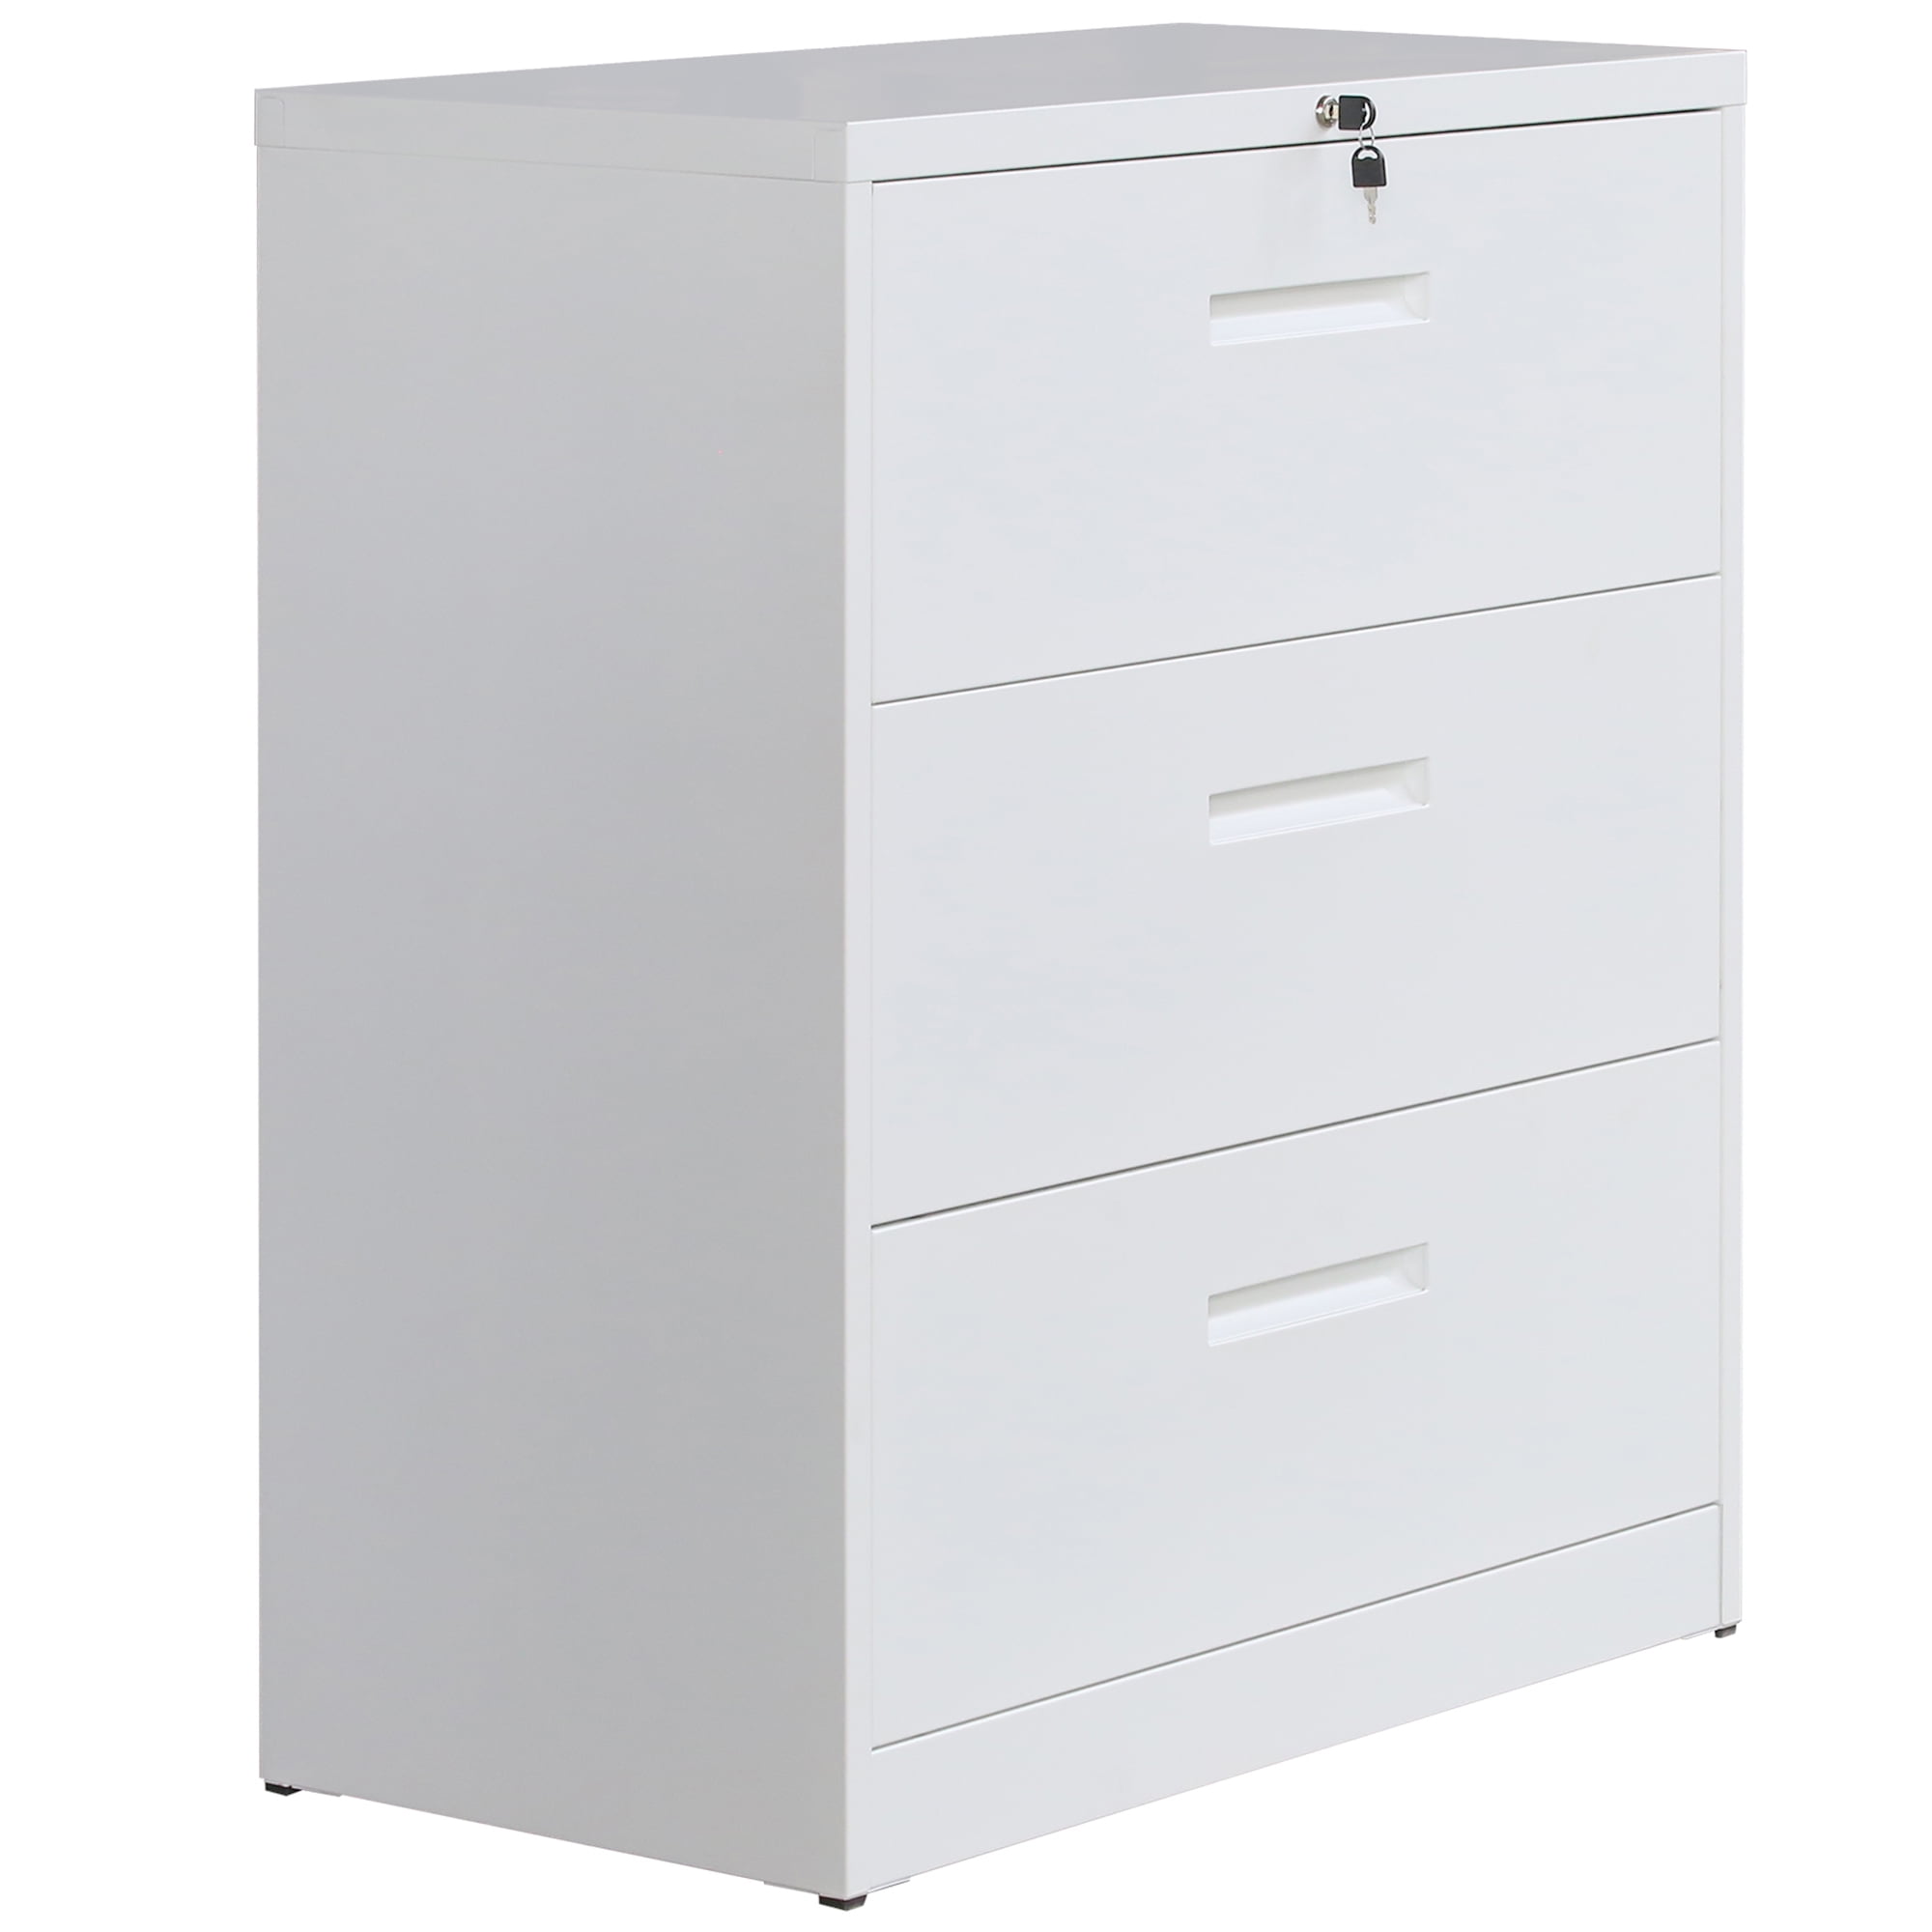 2/3-Drawer File Cabinet Steel Lateral File Cabinet Storage Lockable For Office 